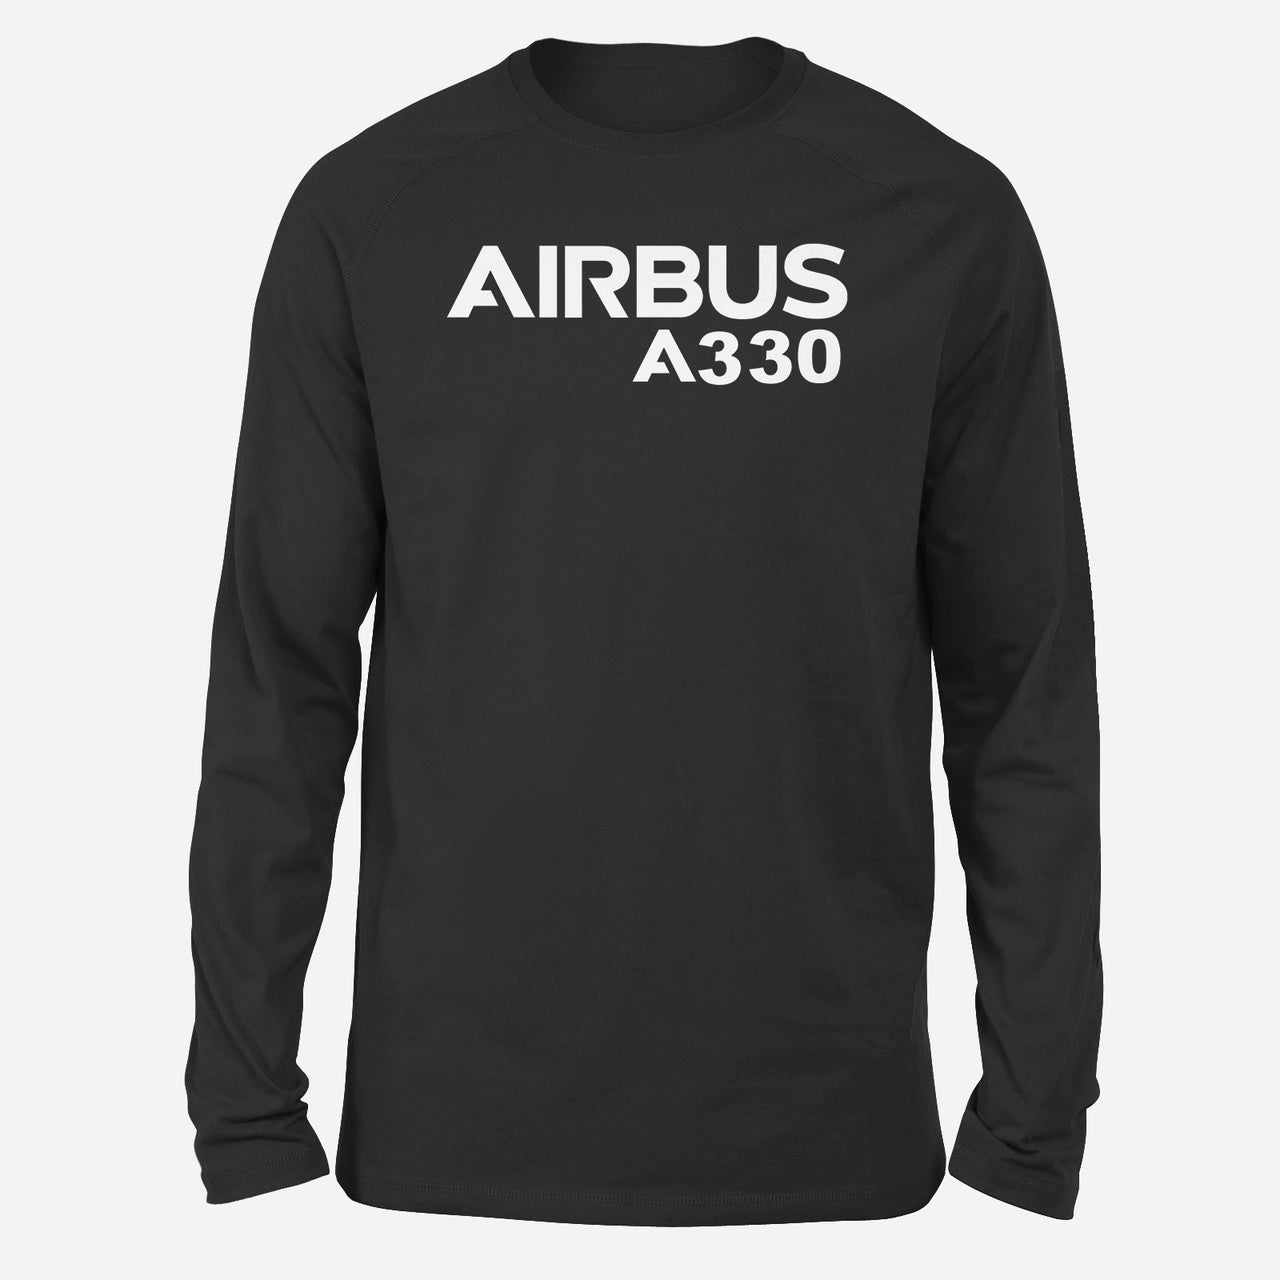 Airbus A330 & Text Designed Long-Sleeve T-Shirts